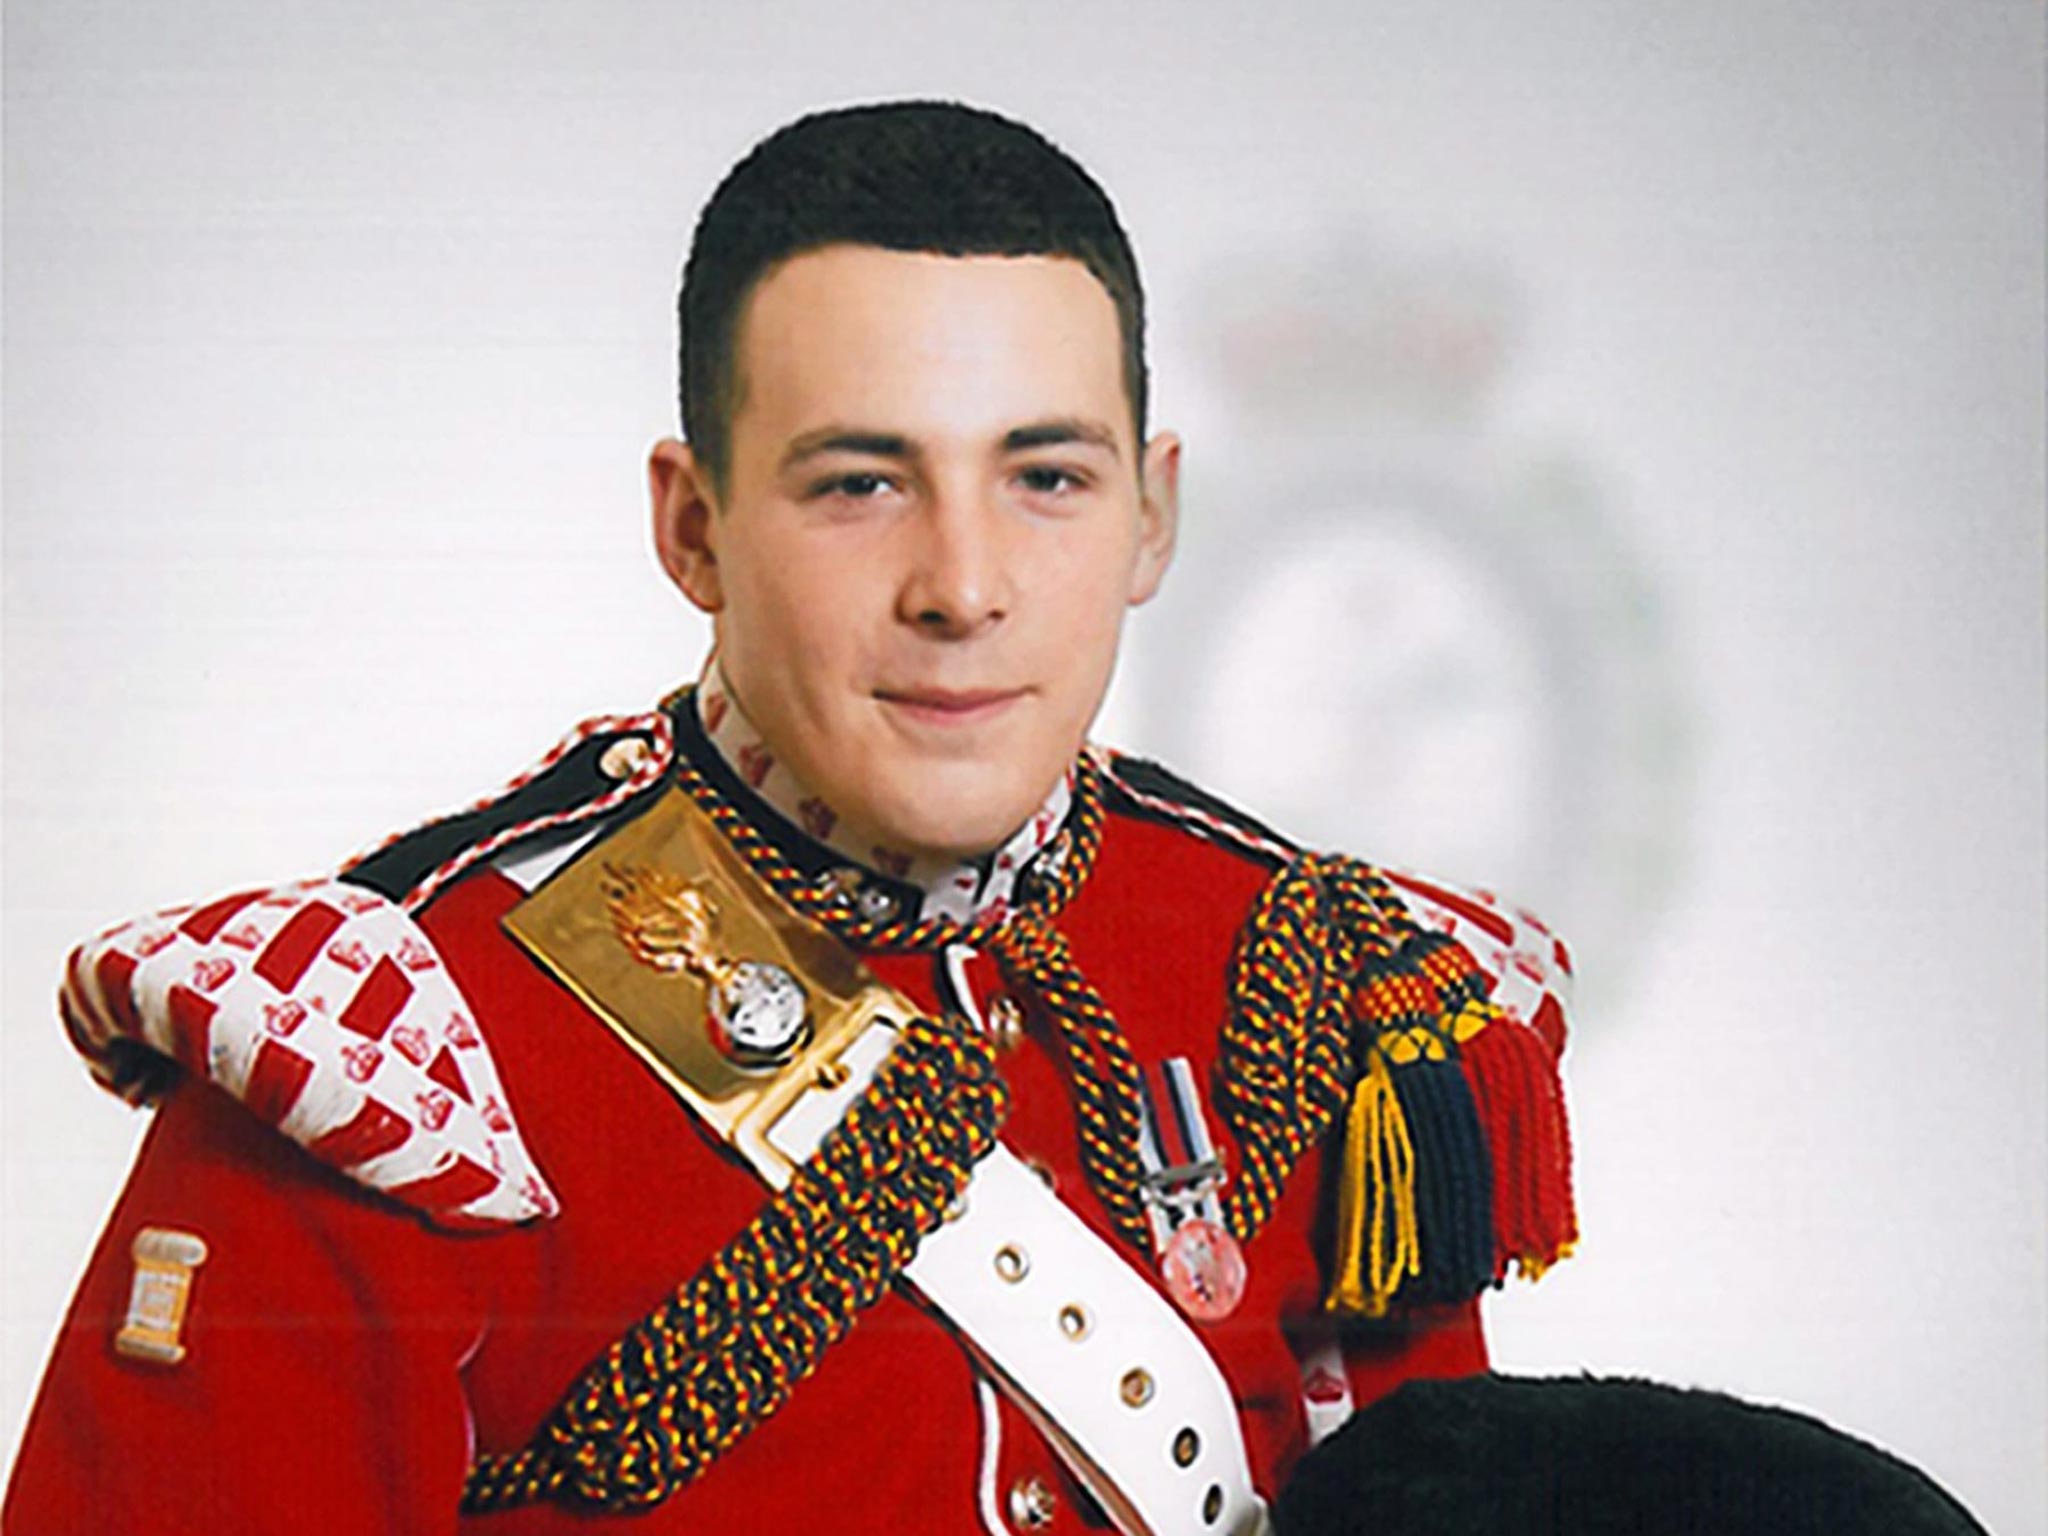 Drummer Lee Rigby, 2nd Battalion The Royal Regiment of Fusiliers. Michael Adebolajo and Michael Adebowale have been found guilty of murdering Rigby outside Woolwich barracks in south-east London